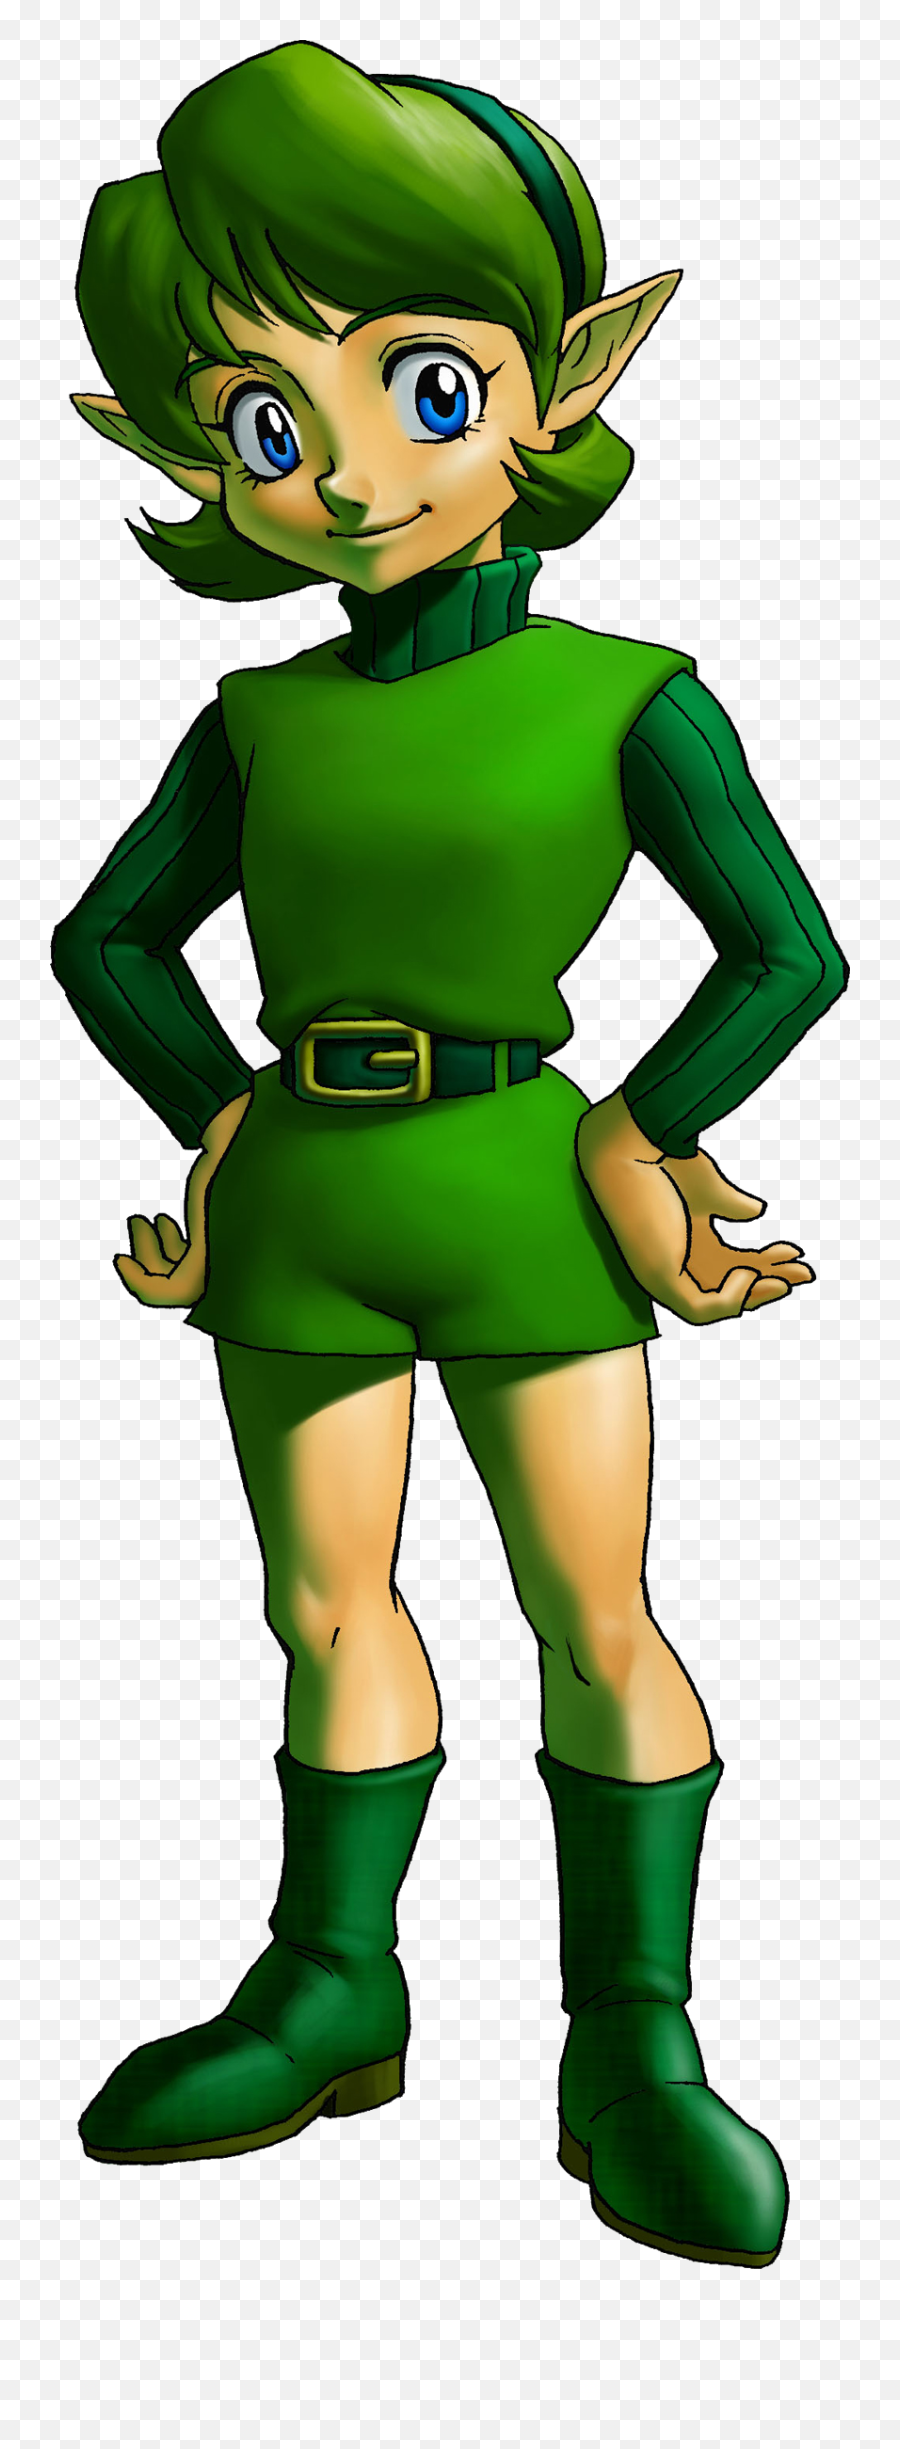 Ocarina Of Time Characters - Ocarina Of Time Saria Png,Ocarina Of Time Png